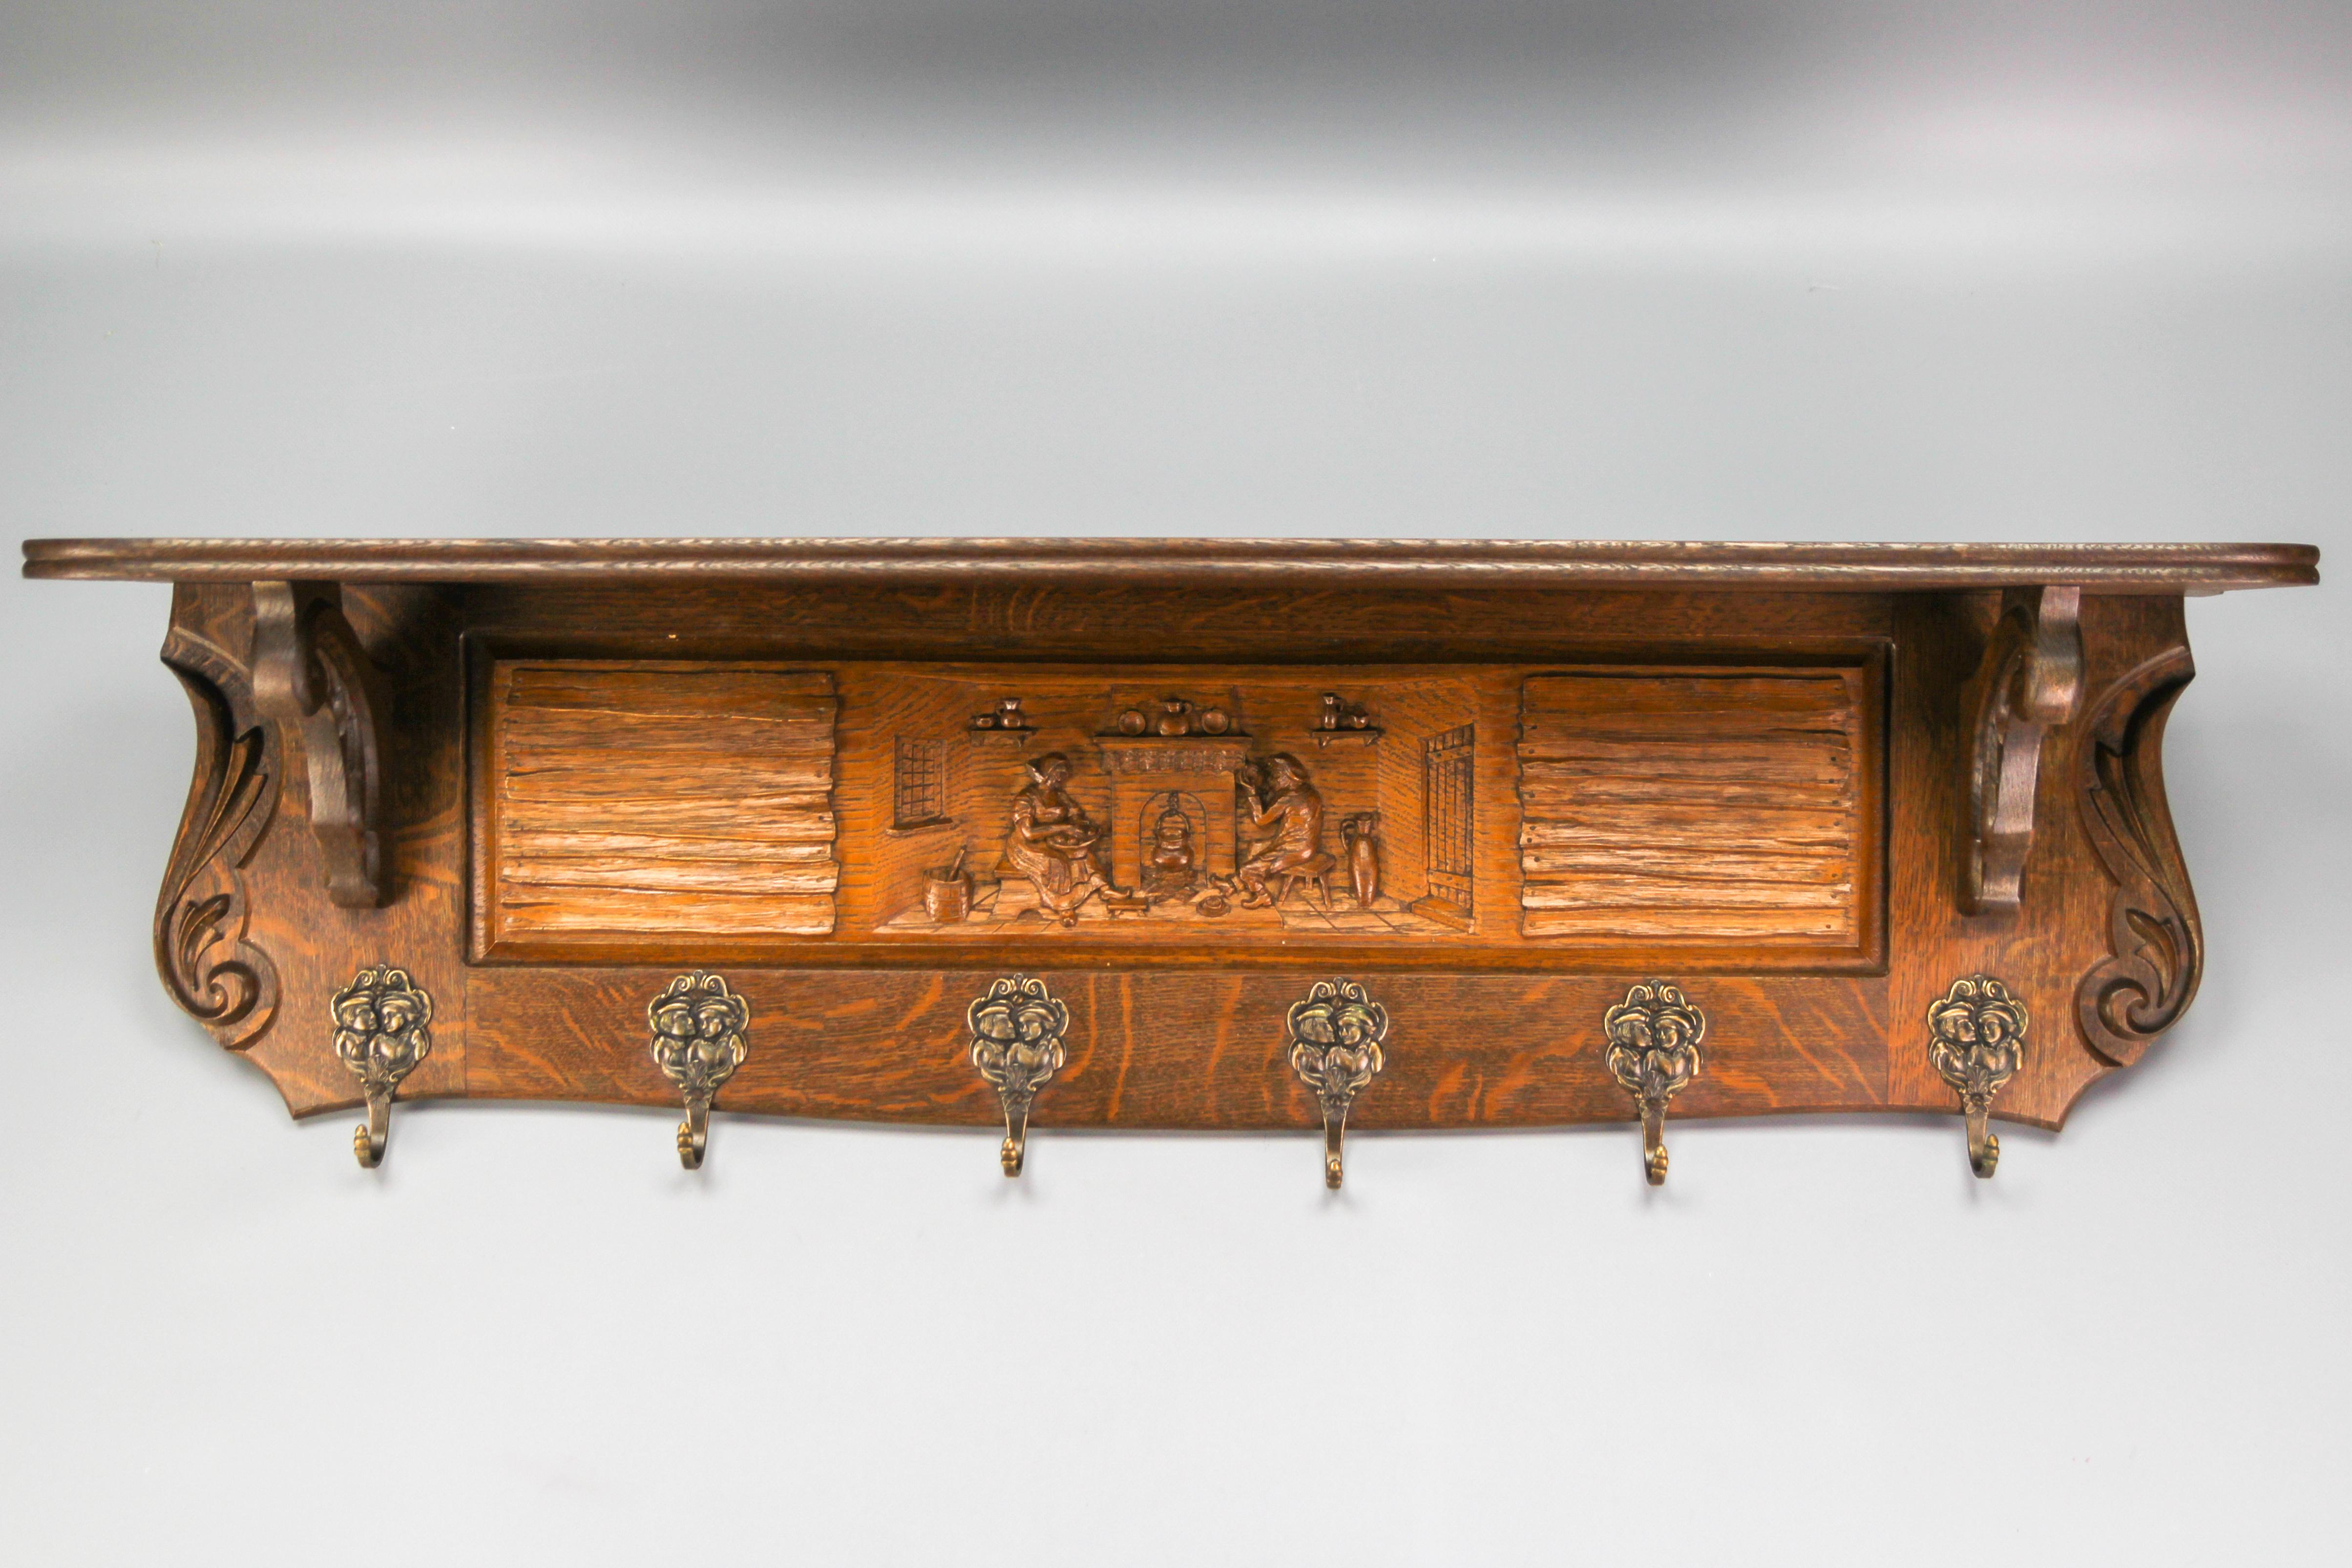 Very decorative Flemish hand-carved oakwood wall hanging coat rack with six attractive Breughel style brass figural hooks and interesting carved scenes.
Ideal for hanging coats and hats. It can be also used as well as a kitchen rack for hanging